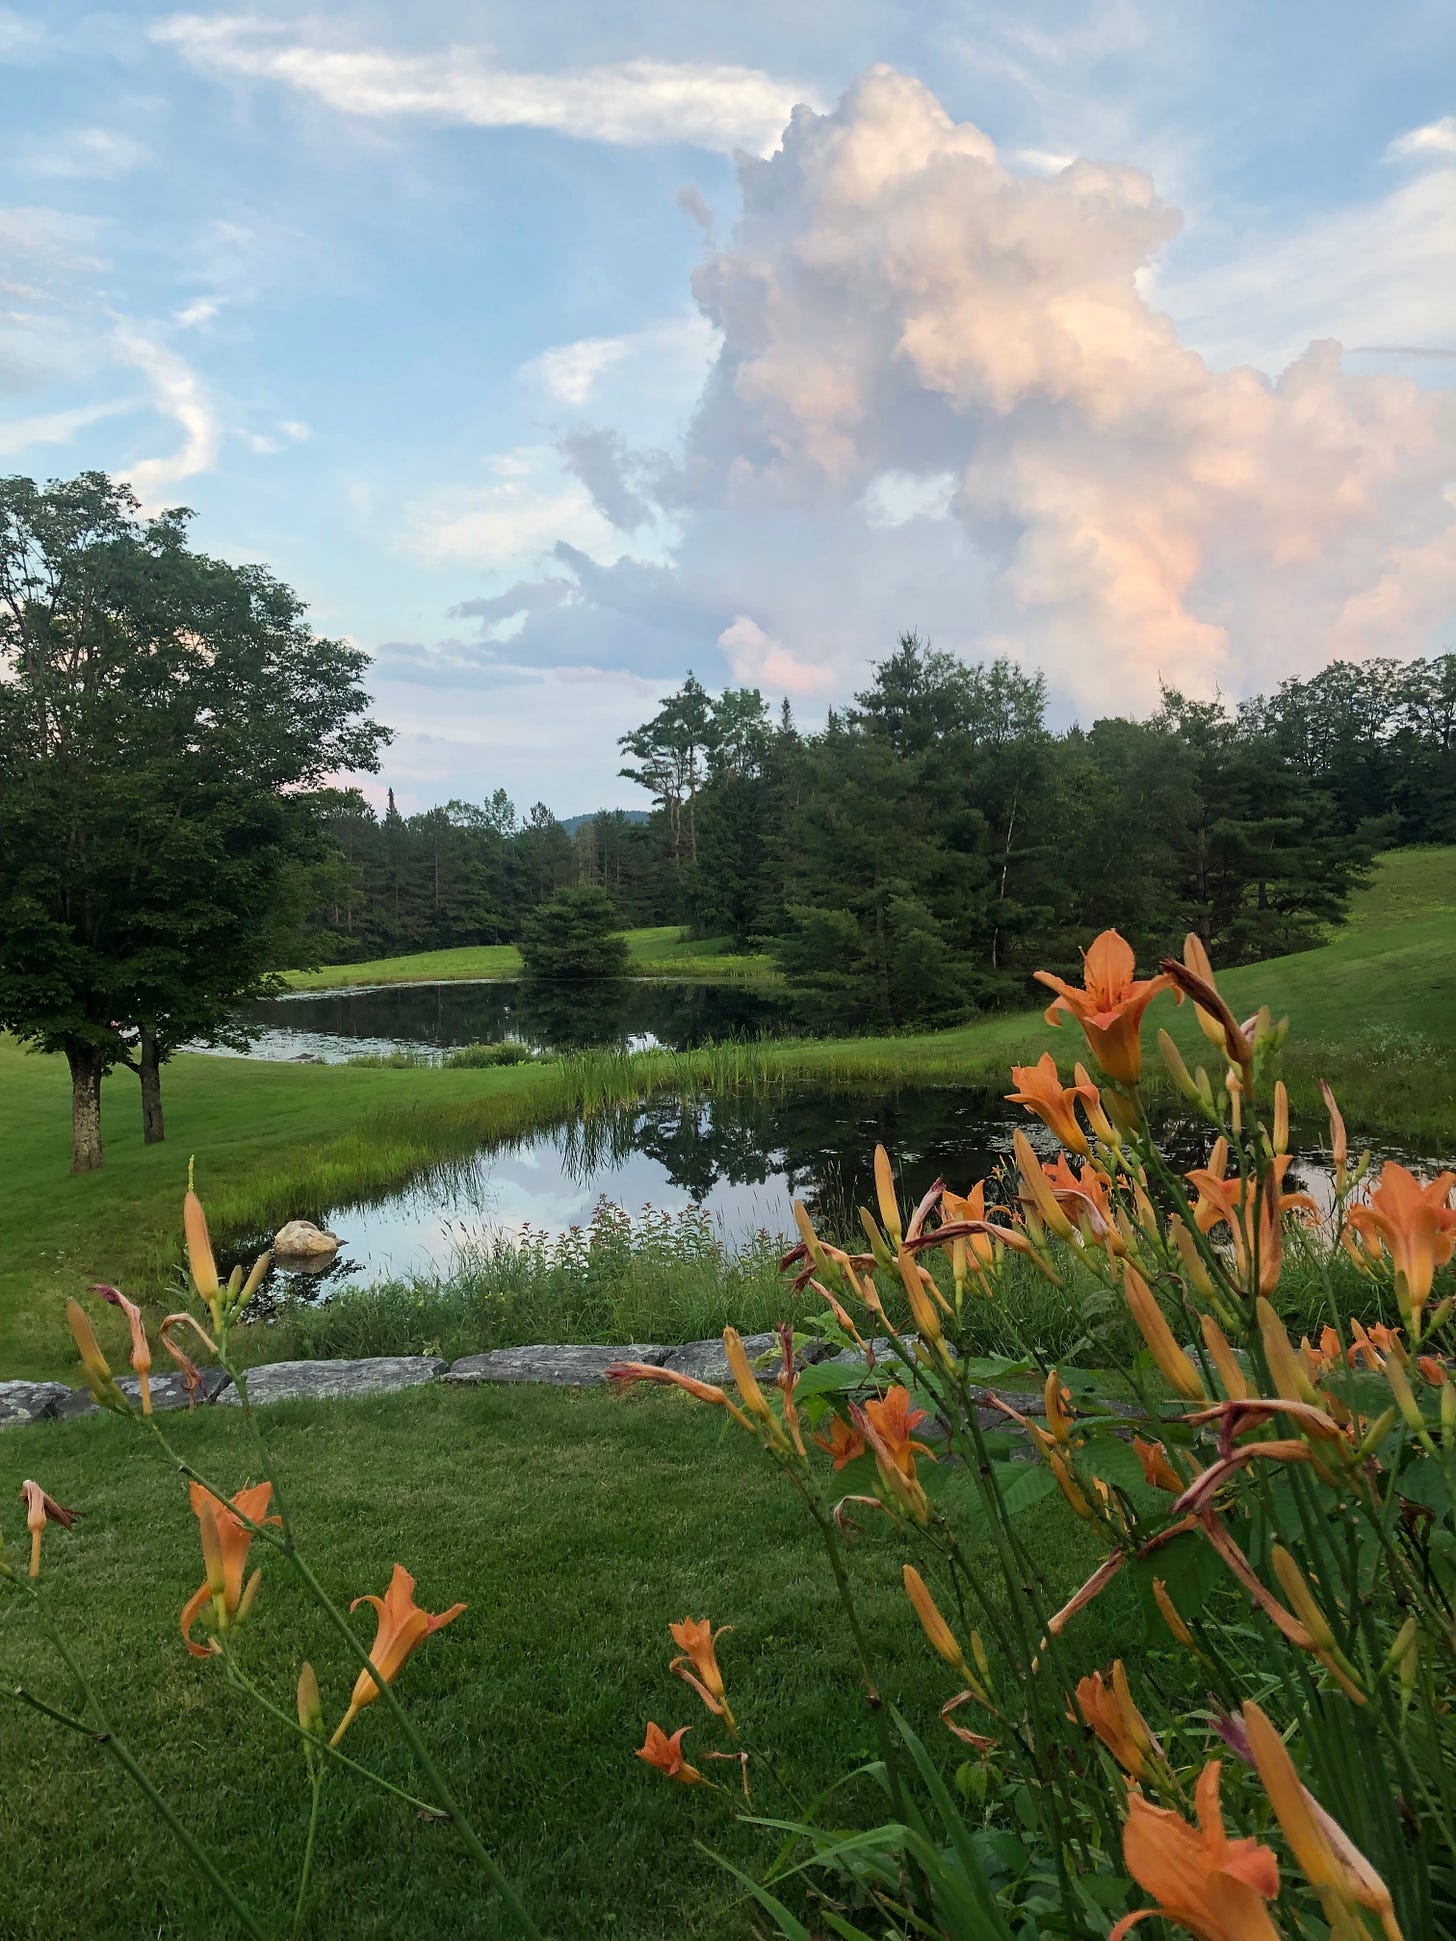 Two natural ponds surrounded by green grass and green trees. The sky is blue and partly clouded above. In the foreground are orange daylilies.